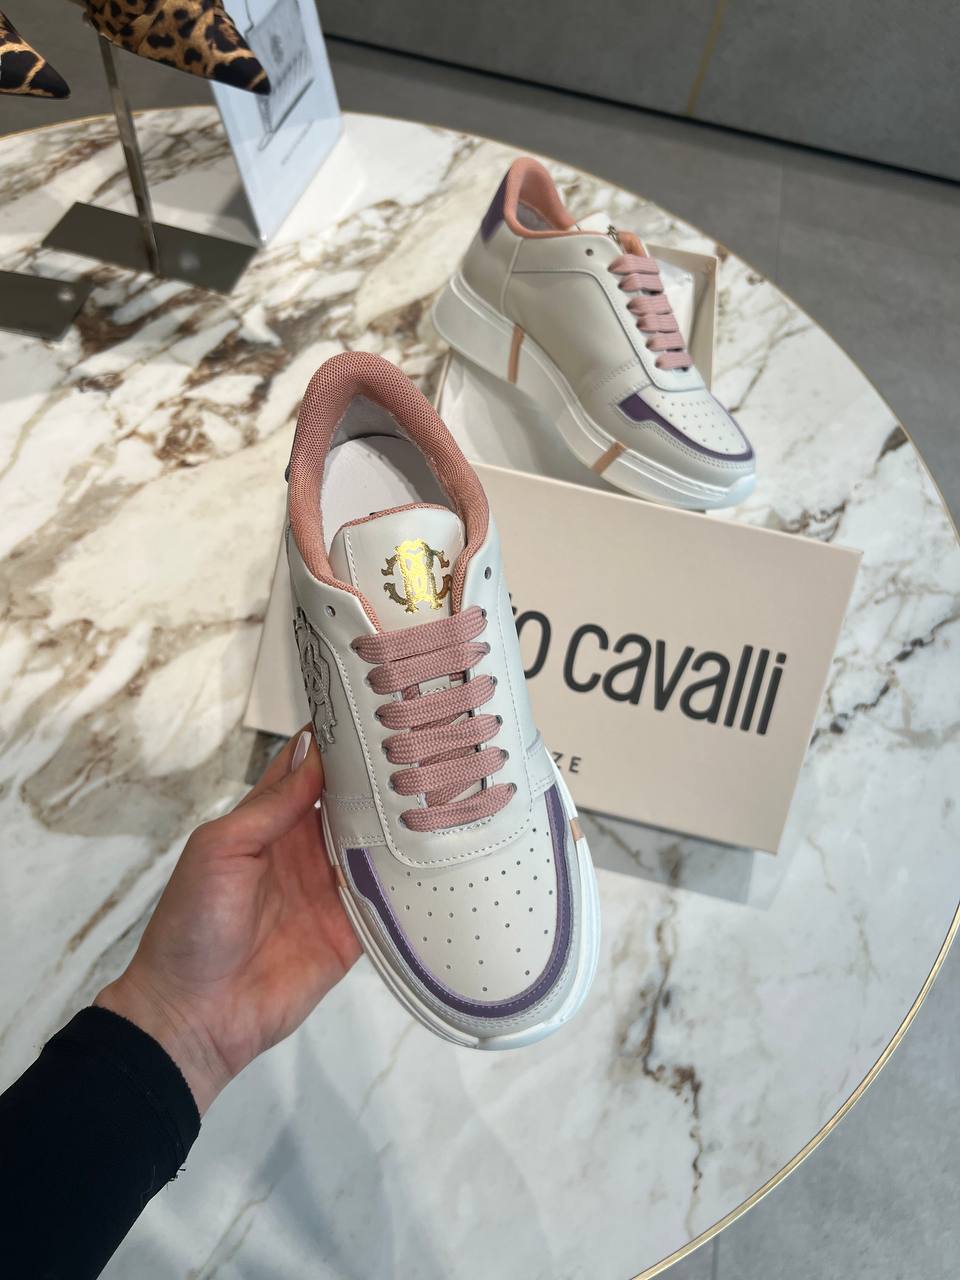 Roberto Cavalli Outlets 5086